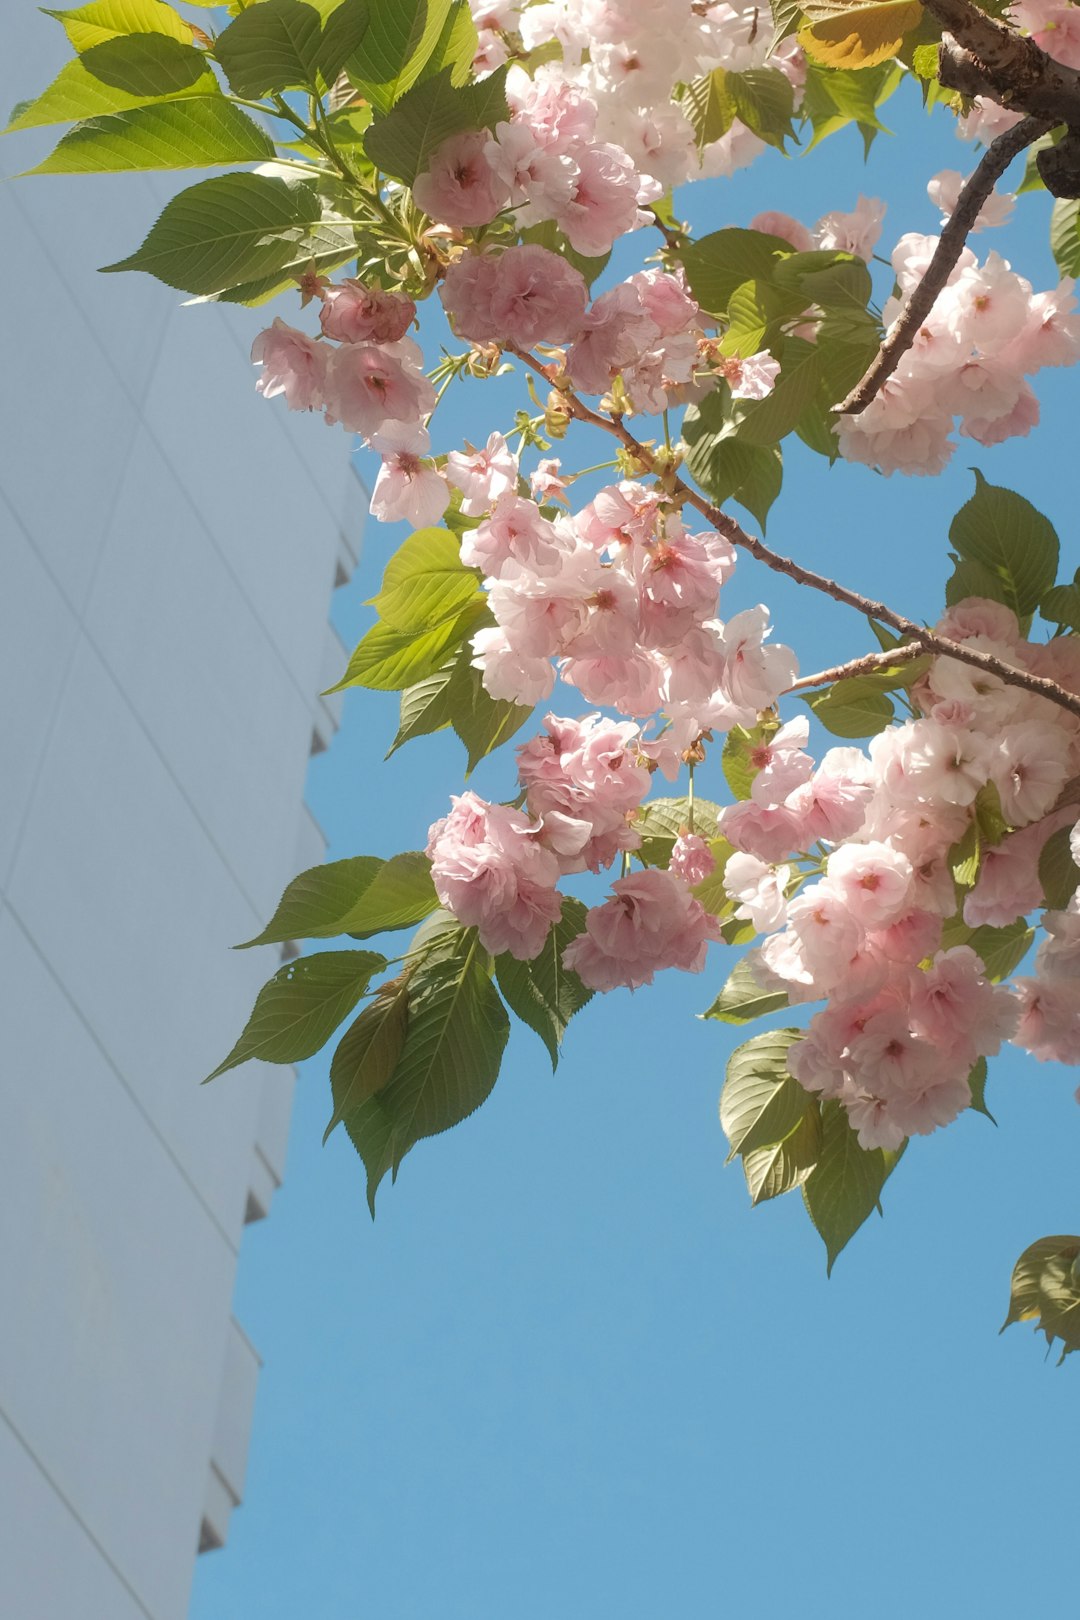 pink and white flowers under blue sky during daytime